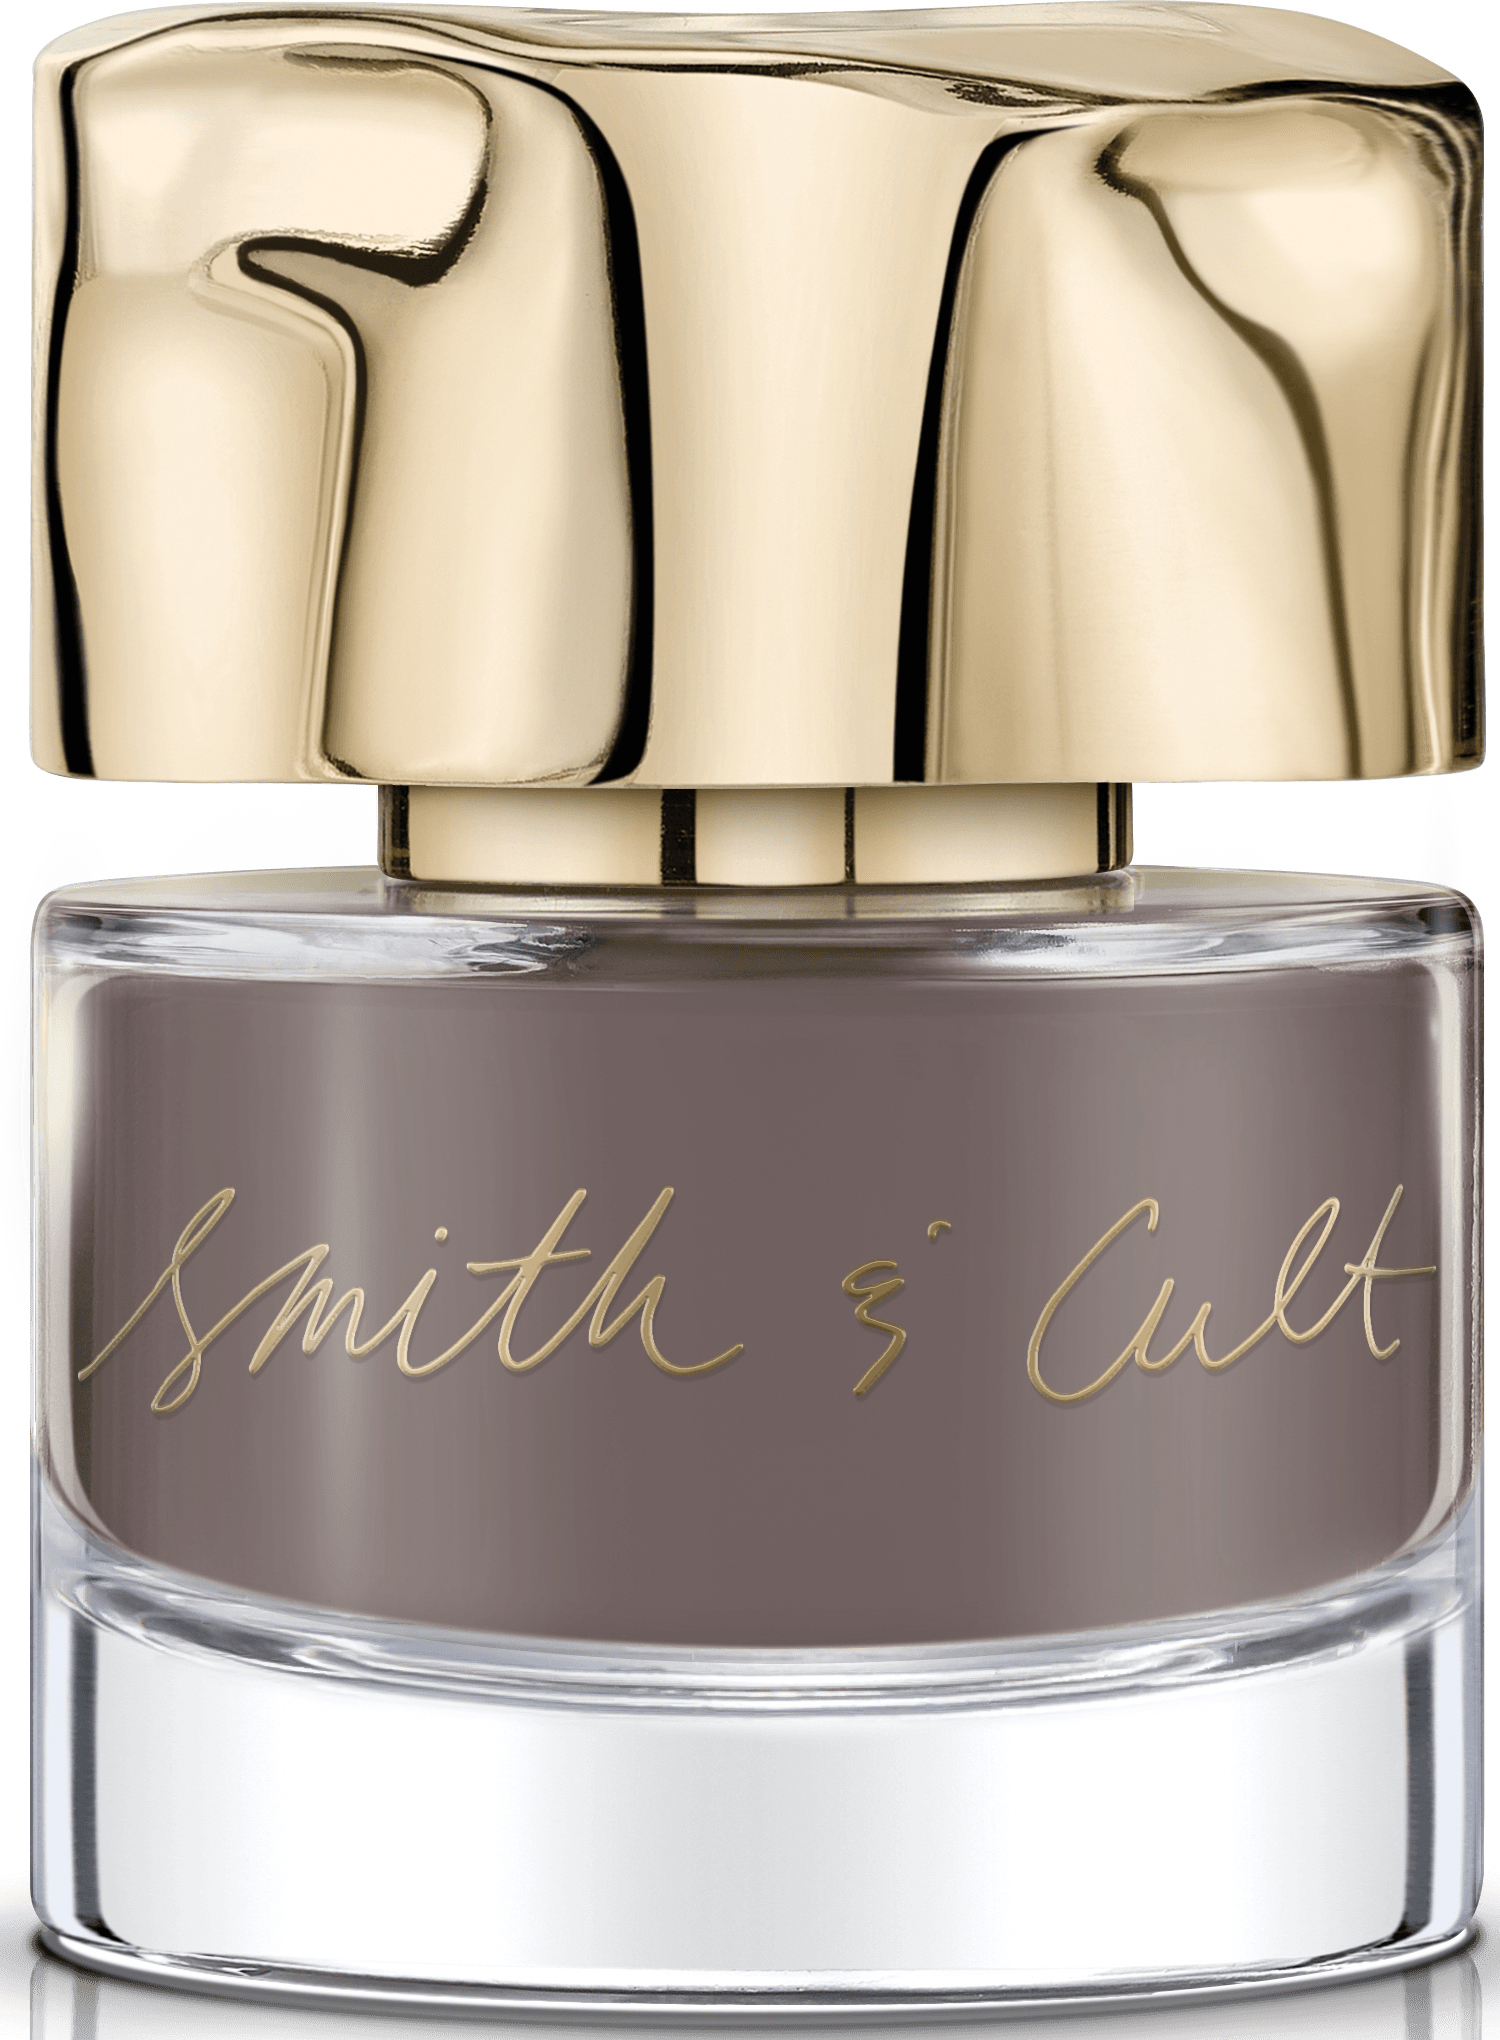 Smith & Cult Nailed Lacquer Stockholm Syndrome